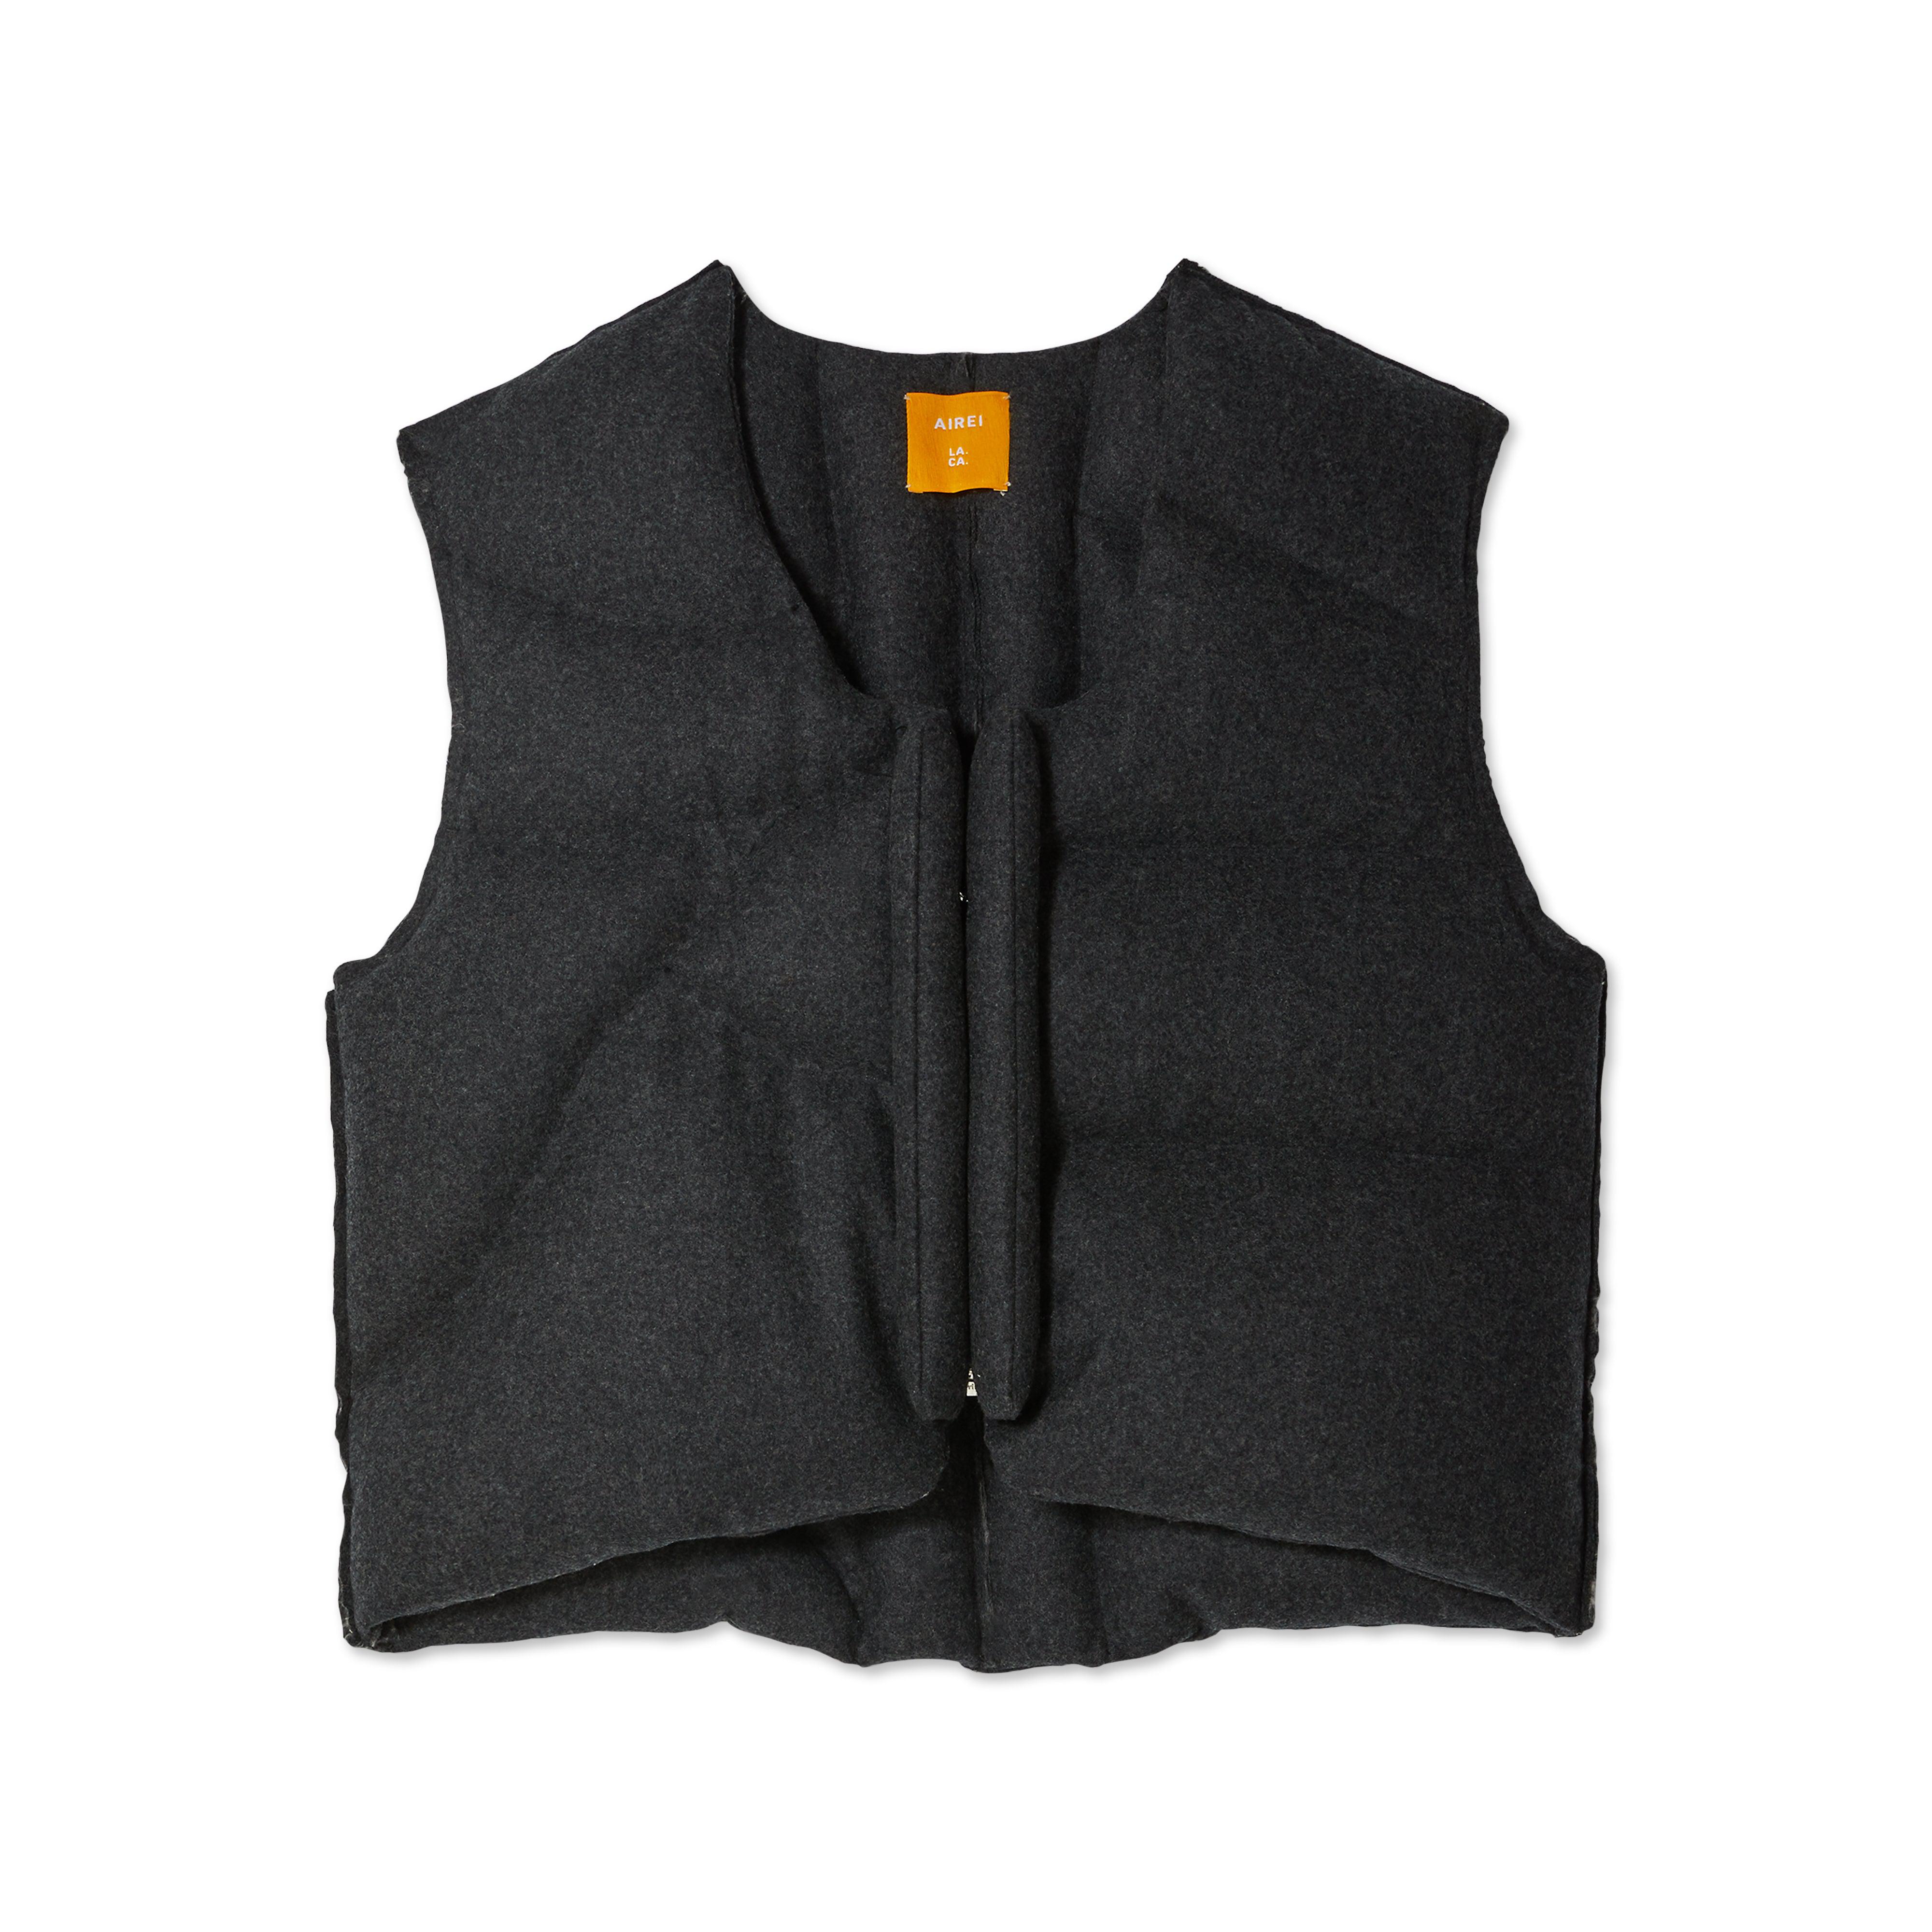 Airei Handstitched Wool Puffer Vest (Black) by AIREI